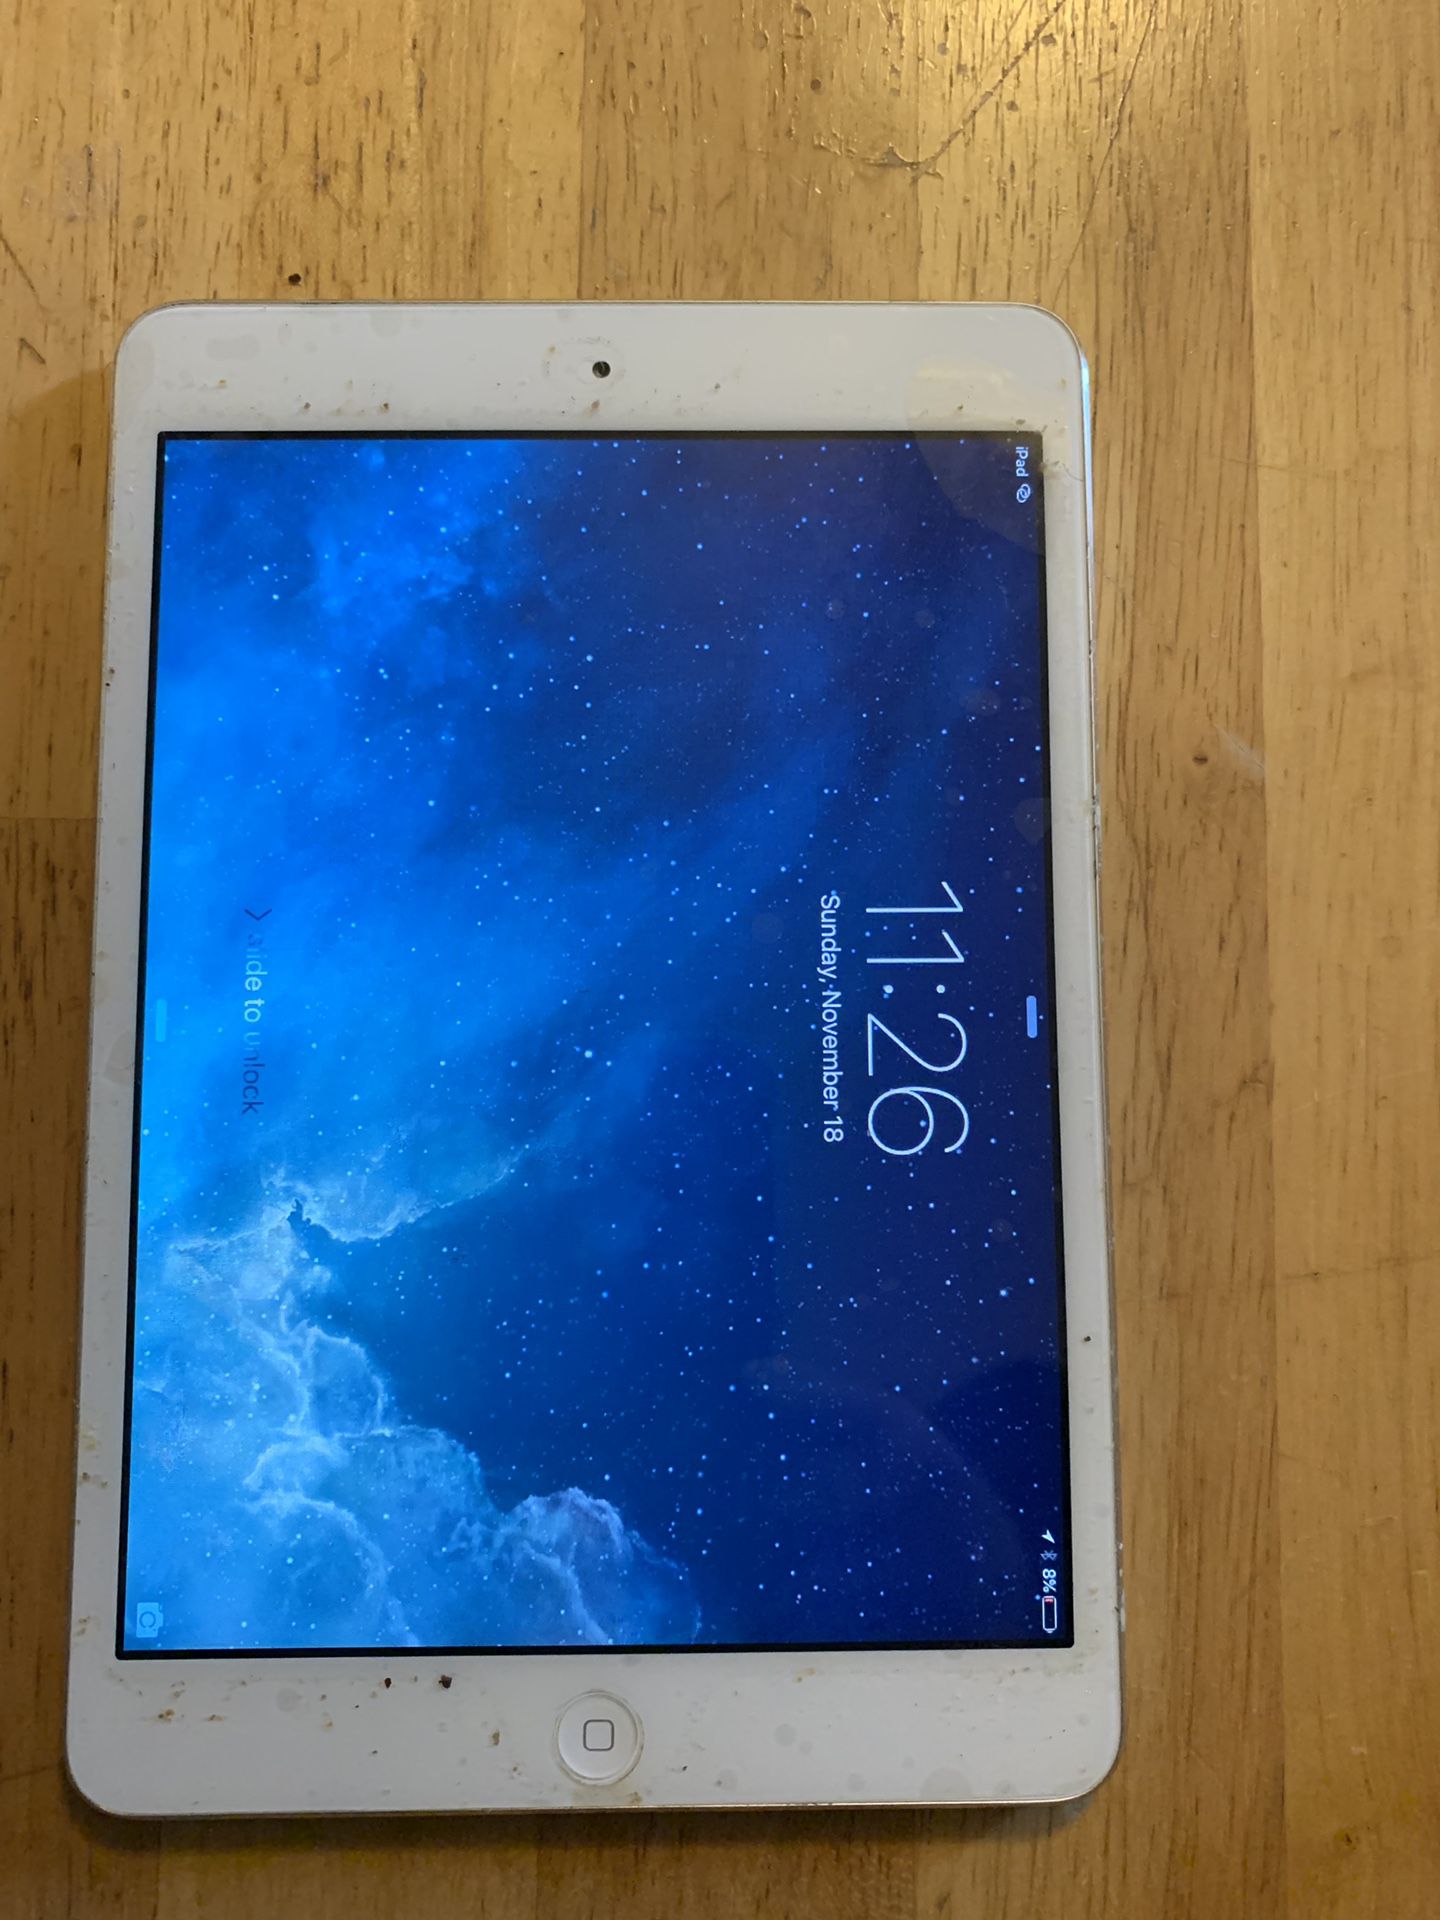 Apple iPad mini 1st generation. Great for the holidays